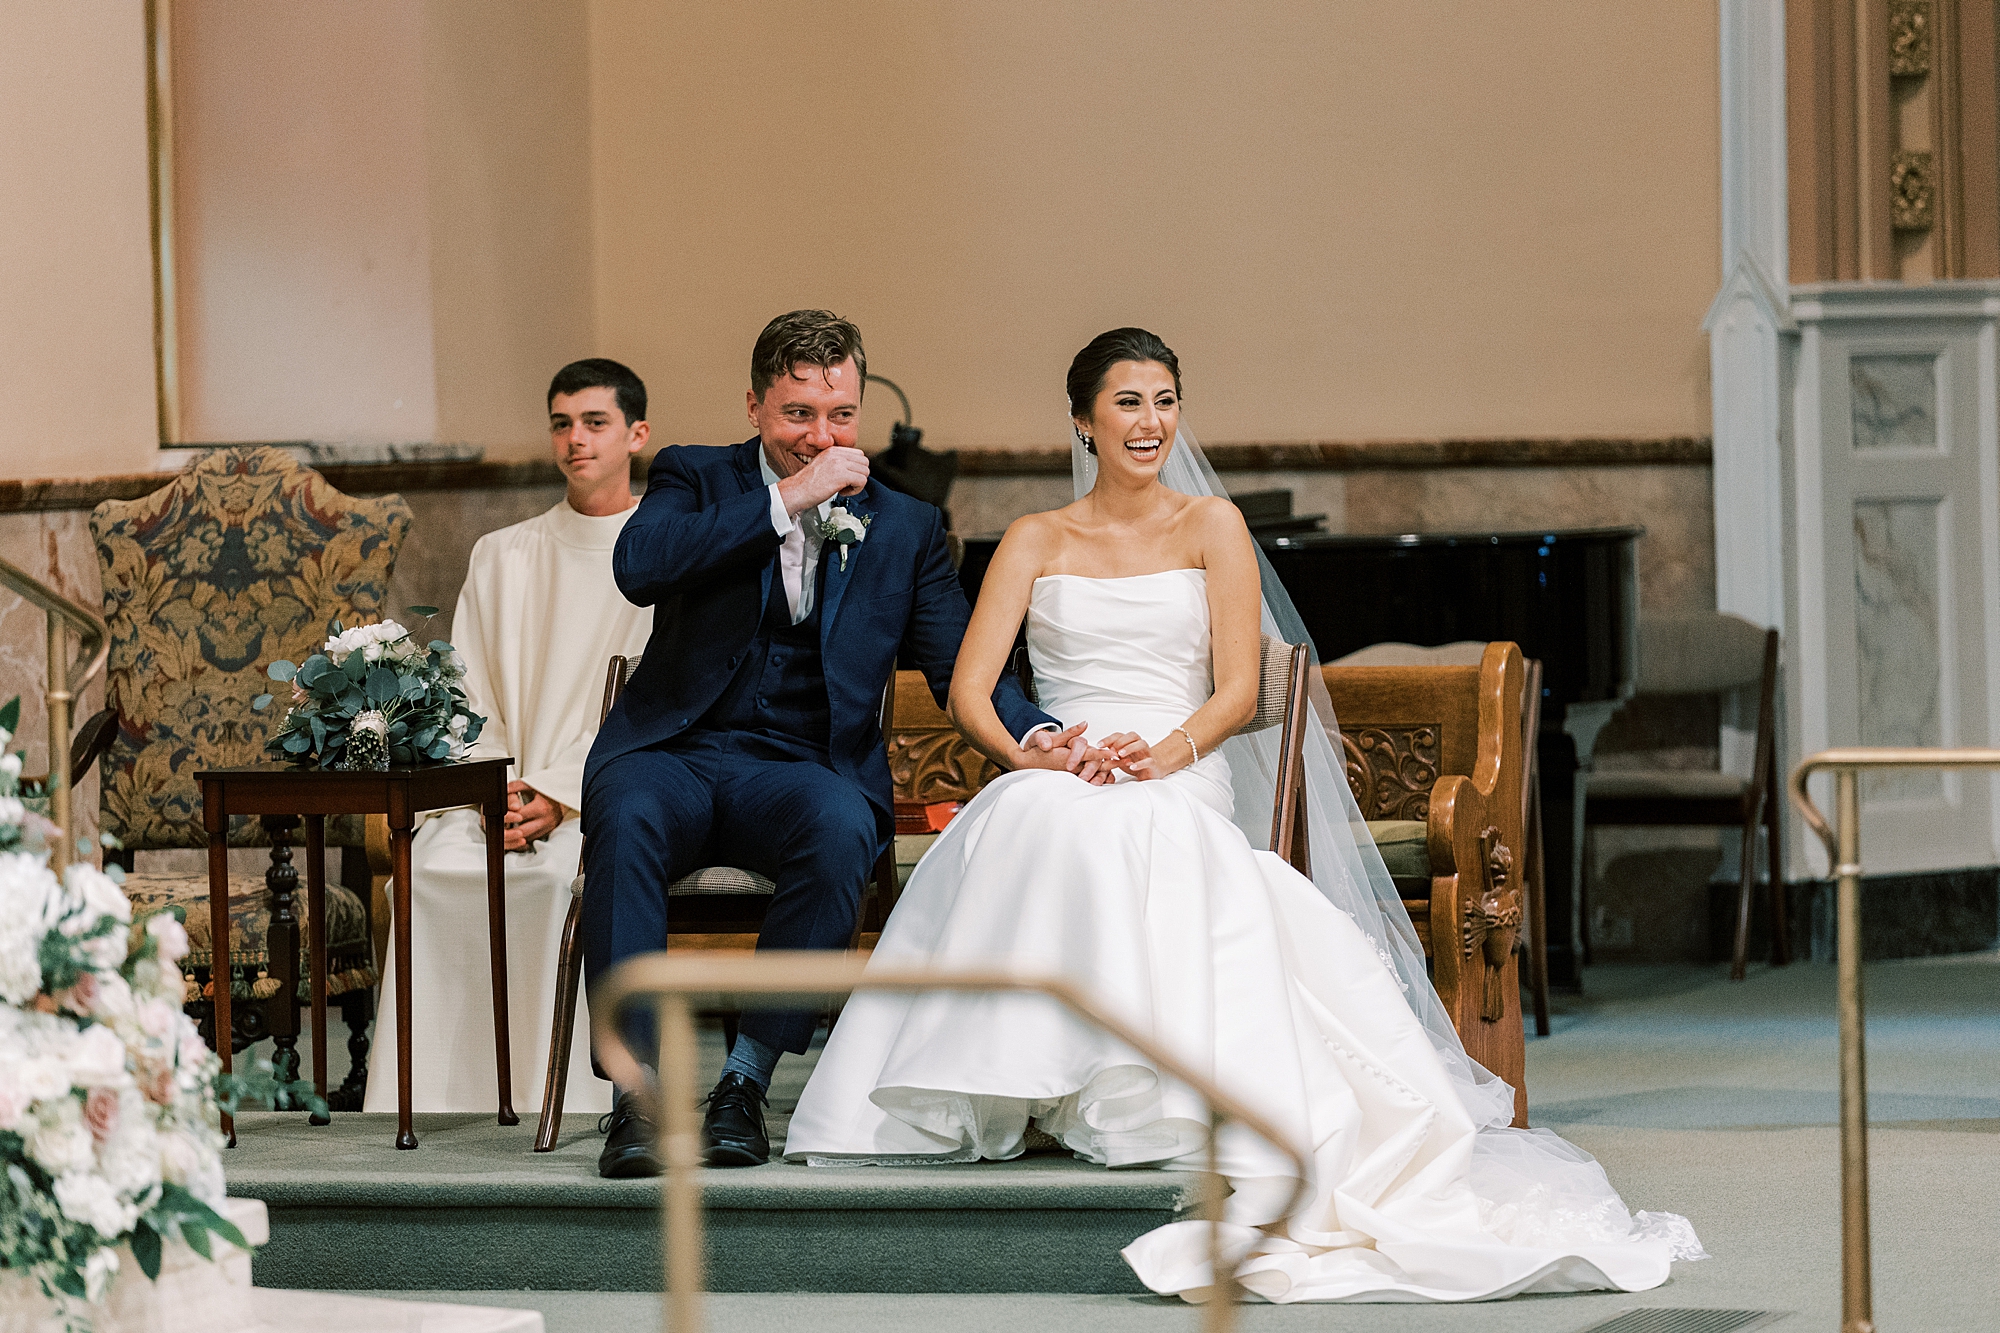 bride and groom sit together during traditional wedding ceremony at Philadelphia PA church